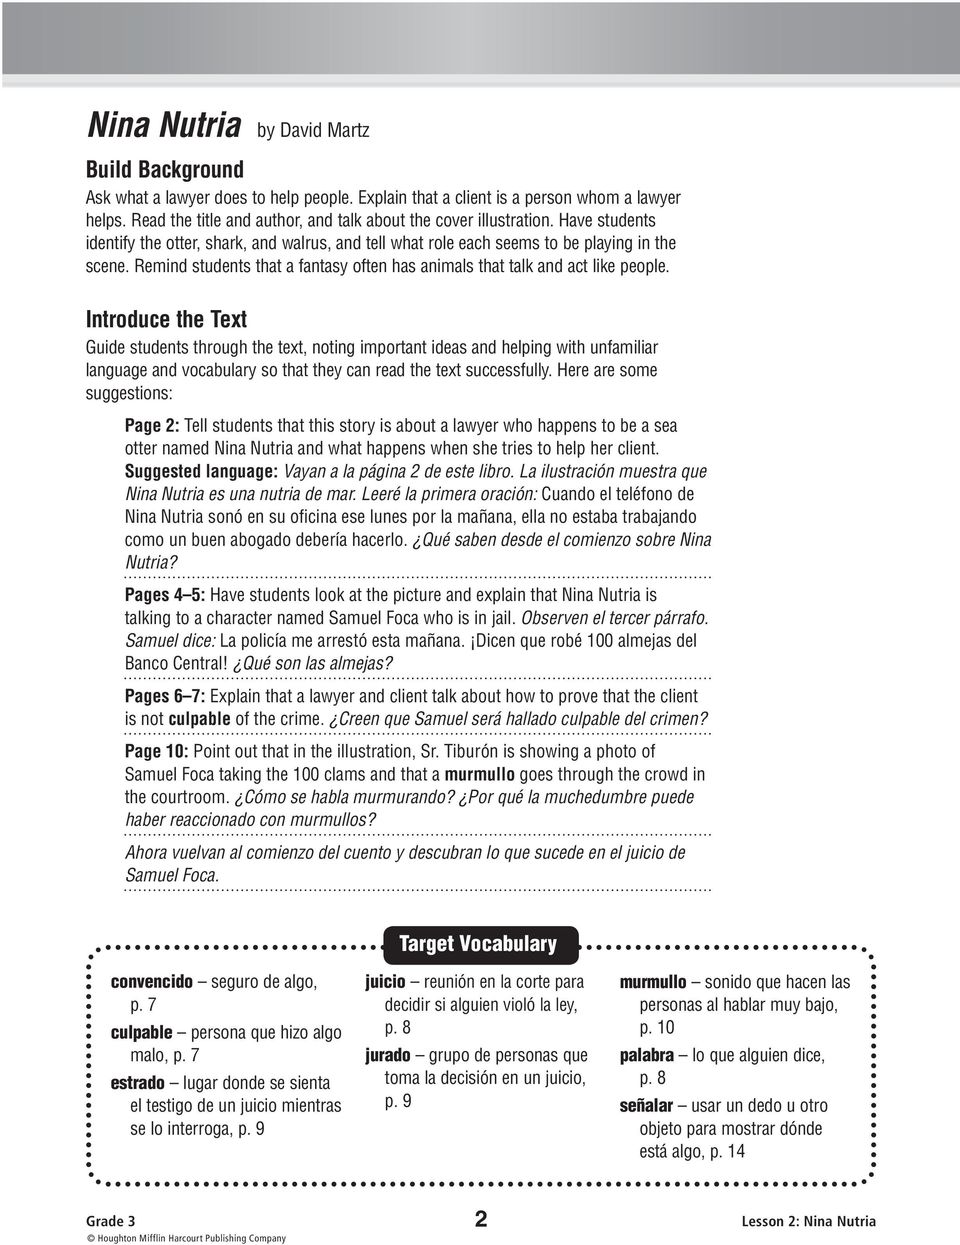 Introduce the Text Guide students through the text, noting important ideas and helping with unfamiliar language and vocabulary so that they can read the text successfully.